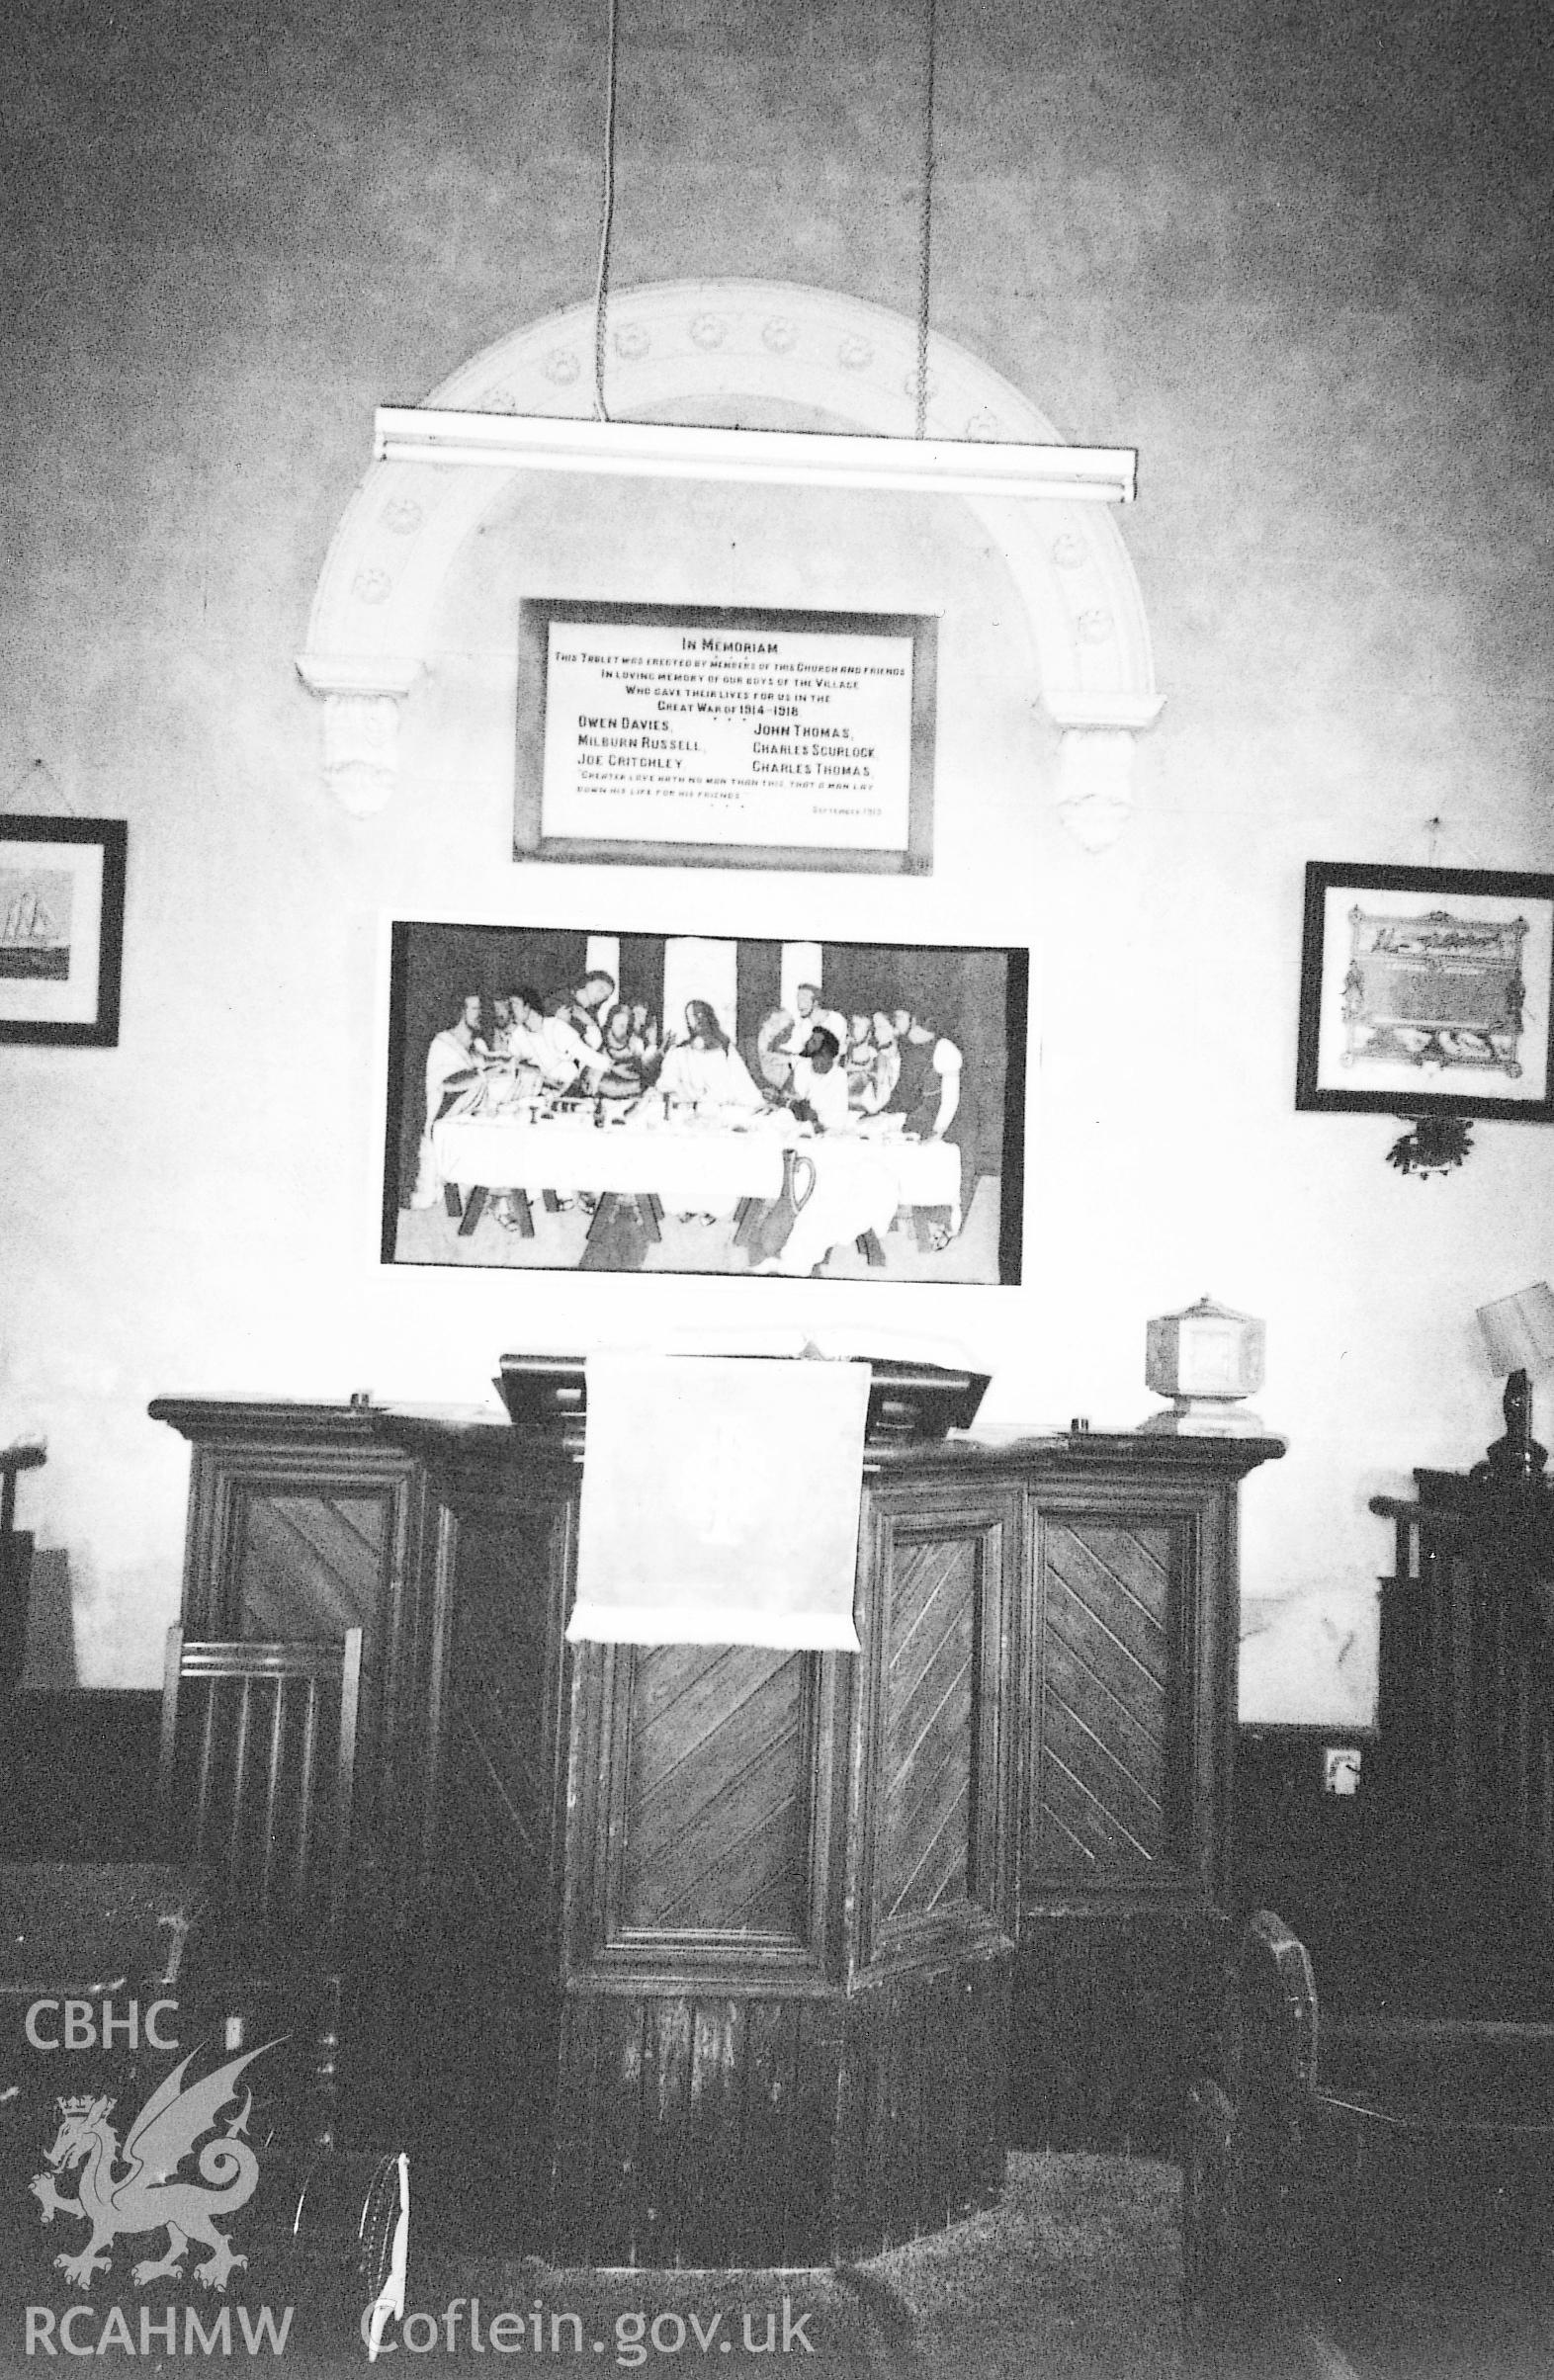 Digital copy of a black and white photograph showing an interior view of Tabernacle Independent Chapel, Rosemarket, taken by Robert Scourfield, 1995.